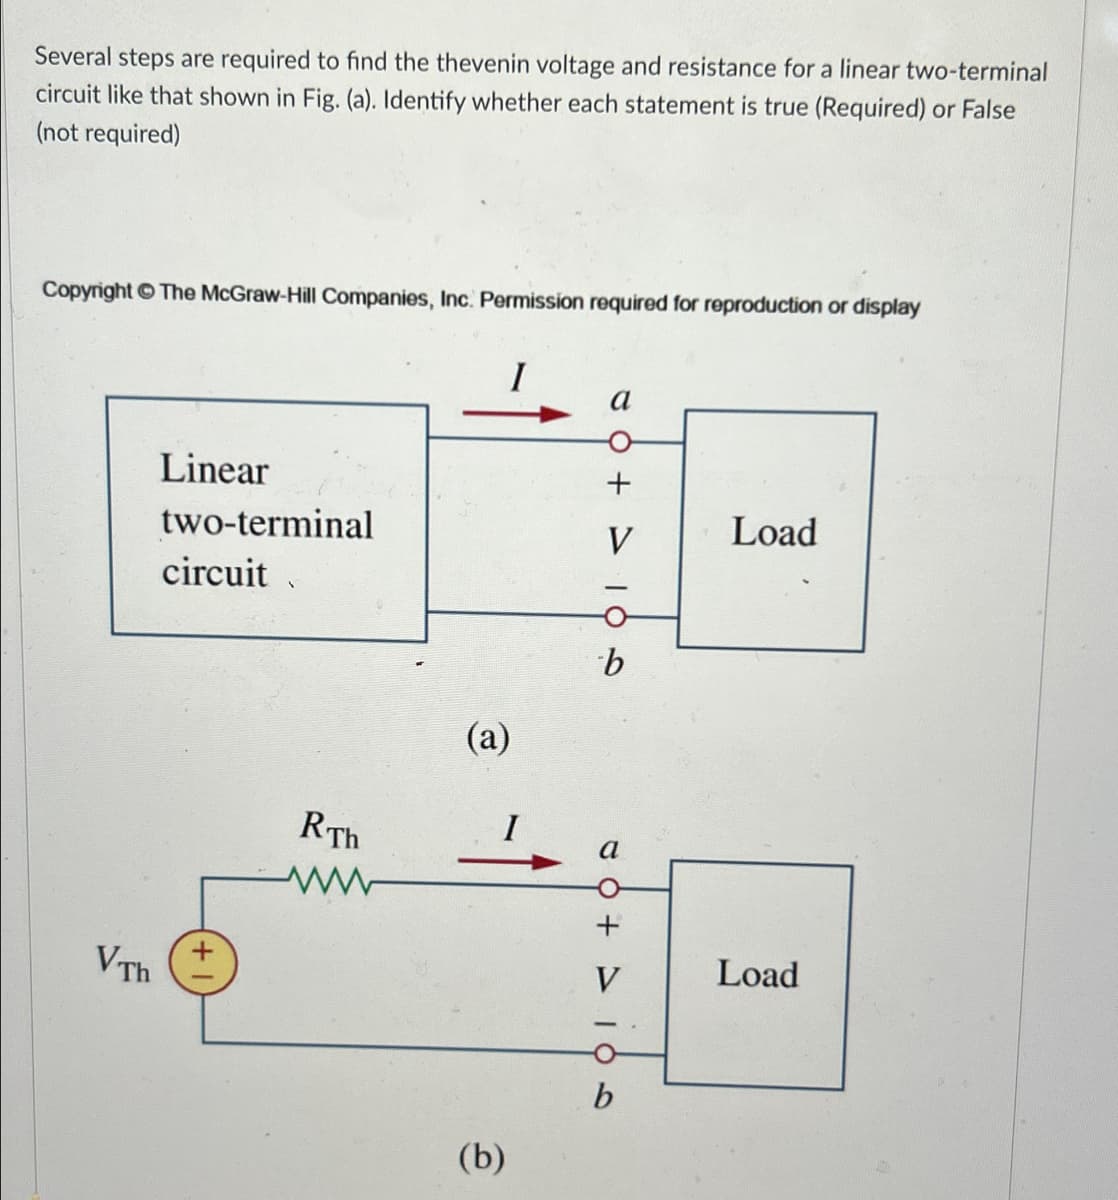 Several steps are required to find the thevenin voltage and resistance for a linear two-terminal
circuit like that shown in Fig. (a). Identify whether each statement is true (Required) or False
(not required)
Copyright The McGraw-Hill Companies, Inc. Permission required for reproduction or display
Linear
two-terminal
circuit.
VTh
I
+
V
Load
-
RTh
(a)
I
b
+
Load
POT VIB
(b)
b